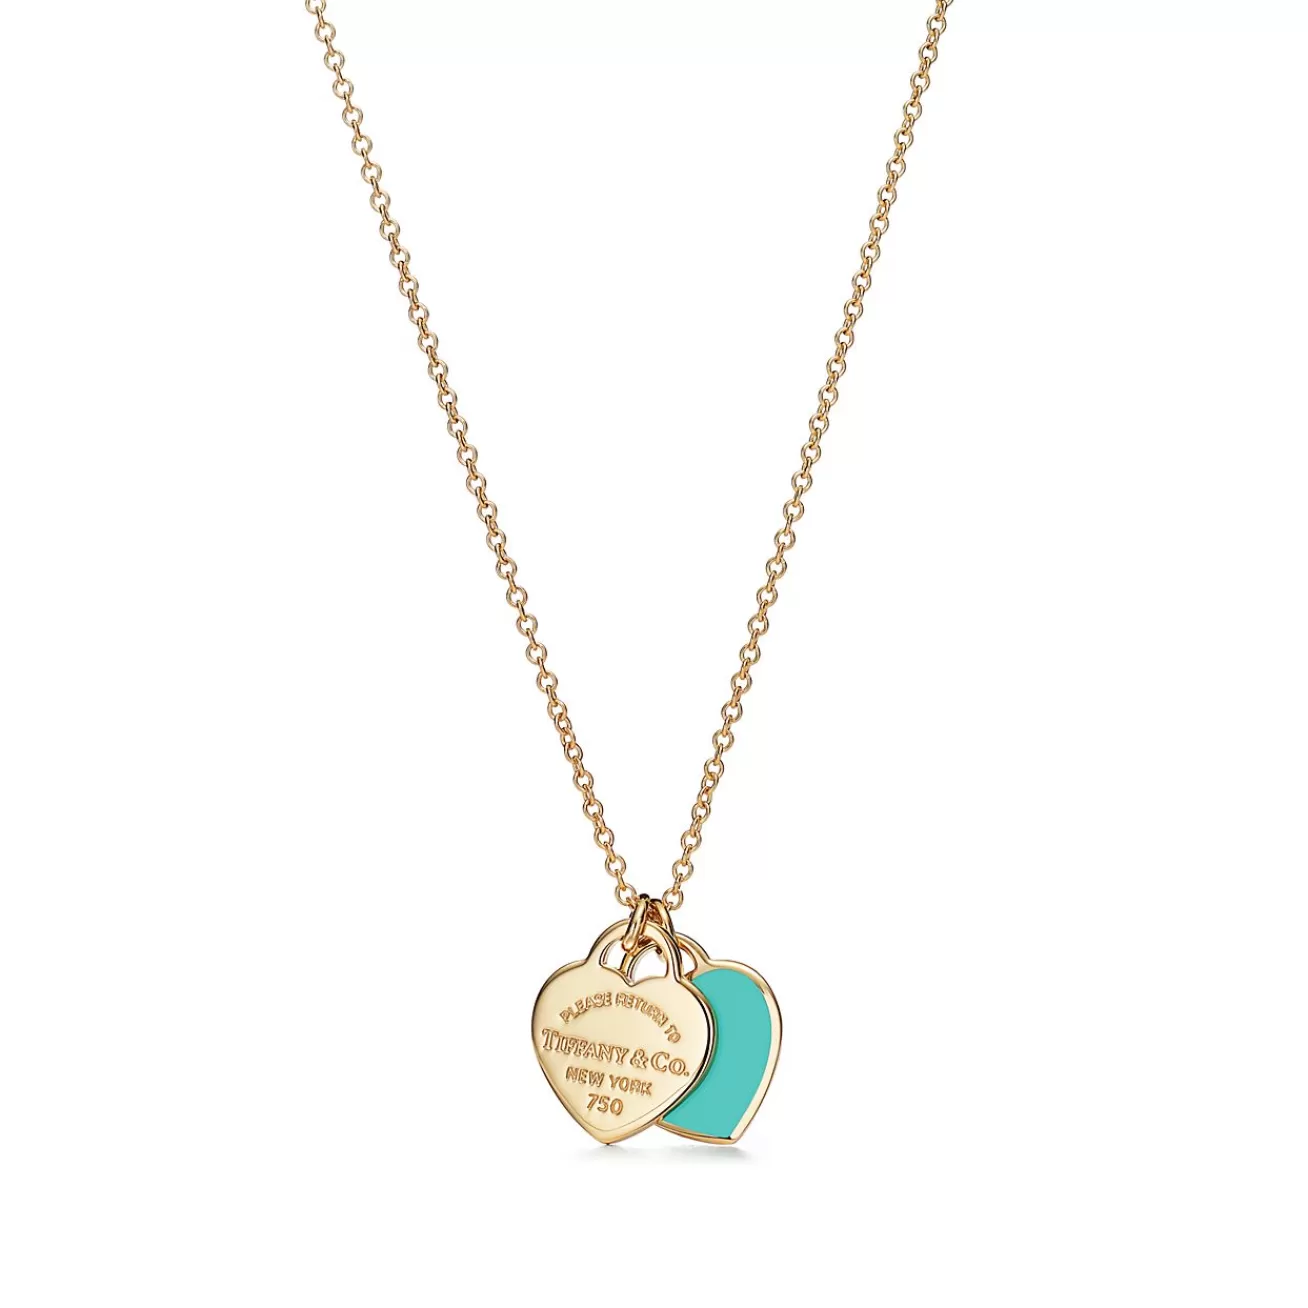 Tiffany & Co. Return to Tiffany® mini double heart tag pendant in 18k gold. | ^ Necklaces & Pendants | Gold Jewelry